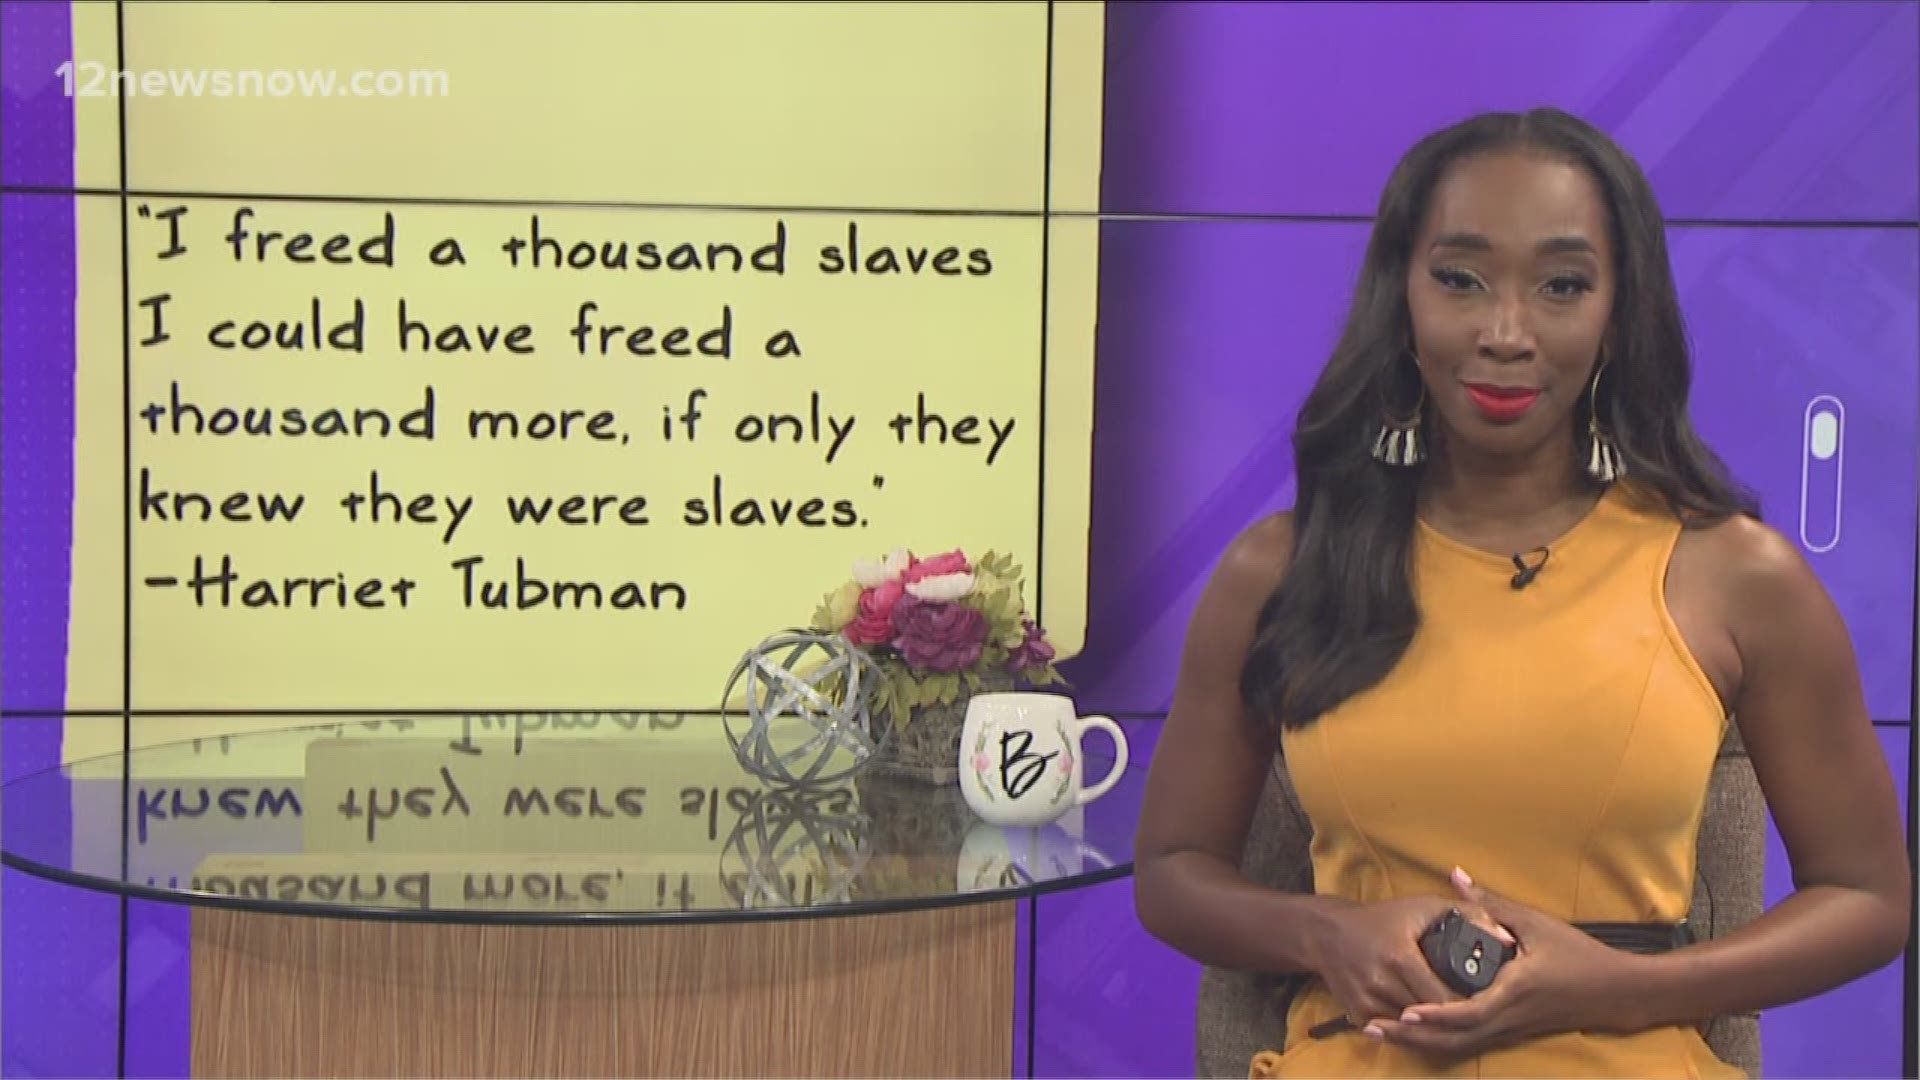 I freed a thousand slaves. I could have freed a thousand more if only they knew they were slaves.
-Harriet Tubman